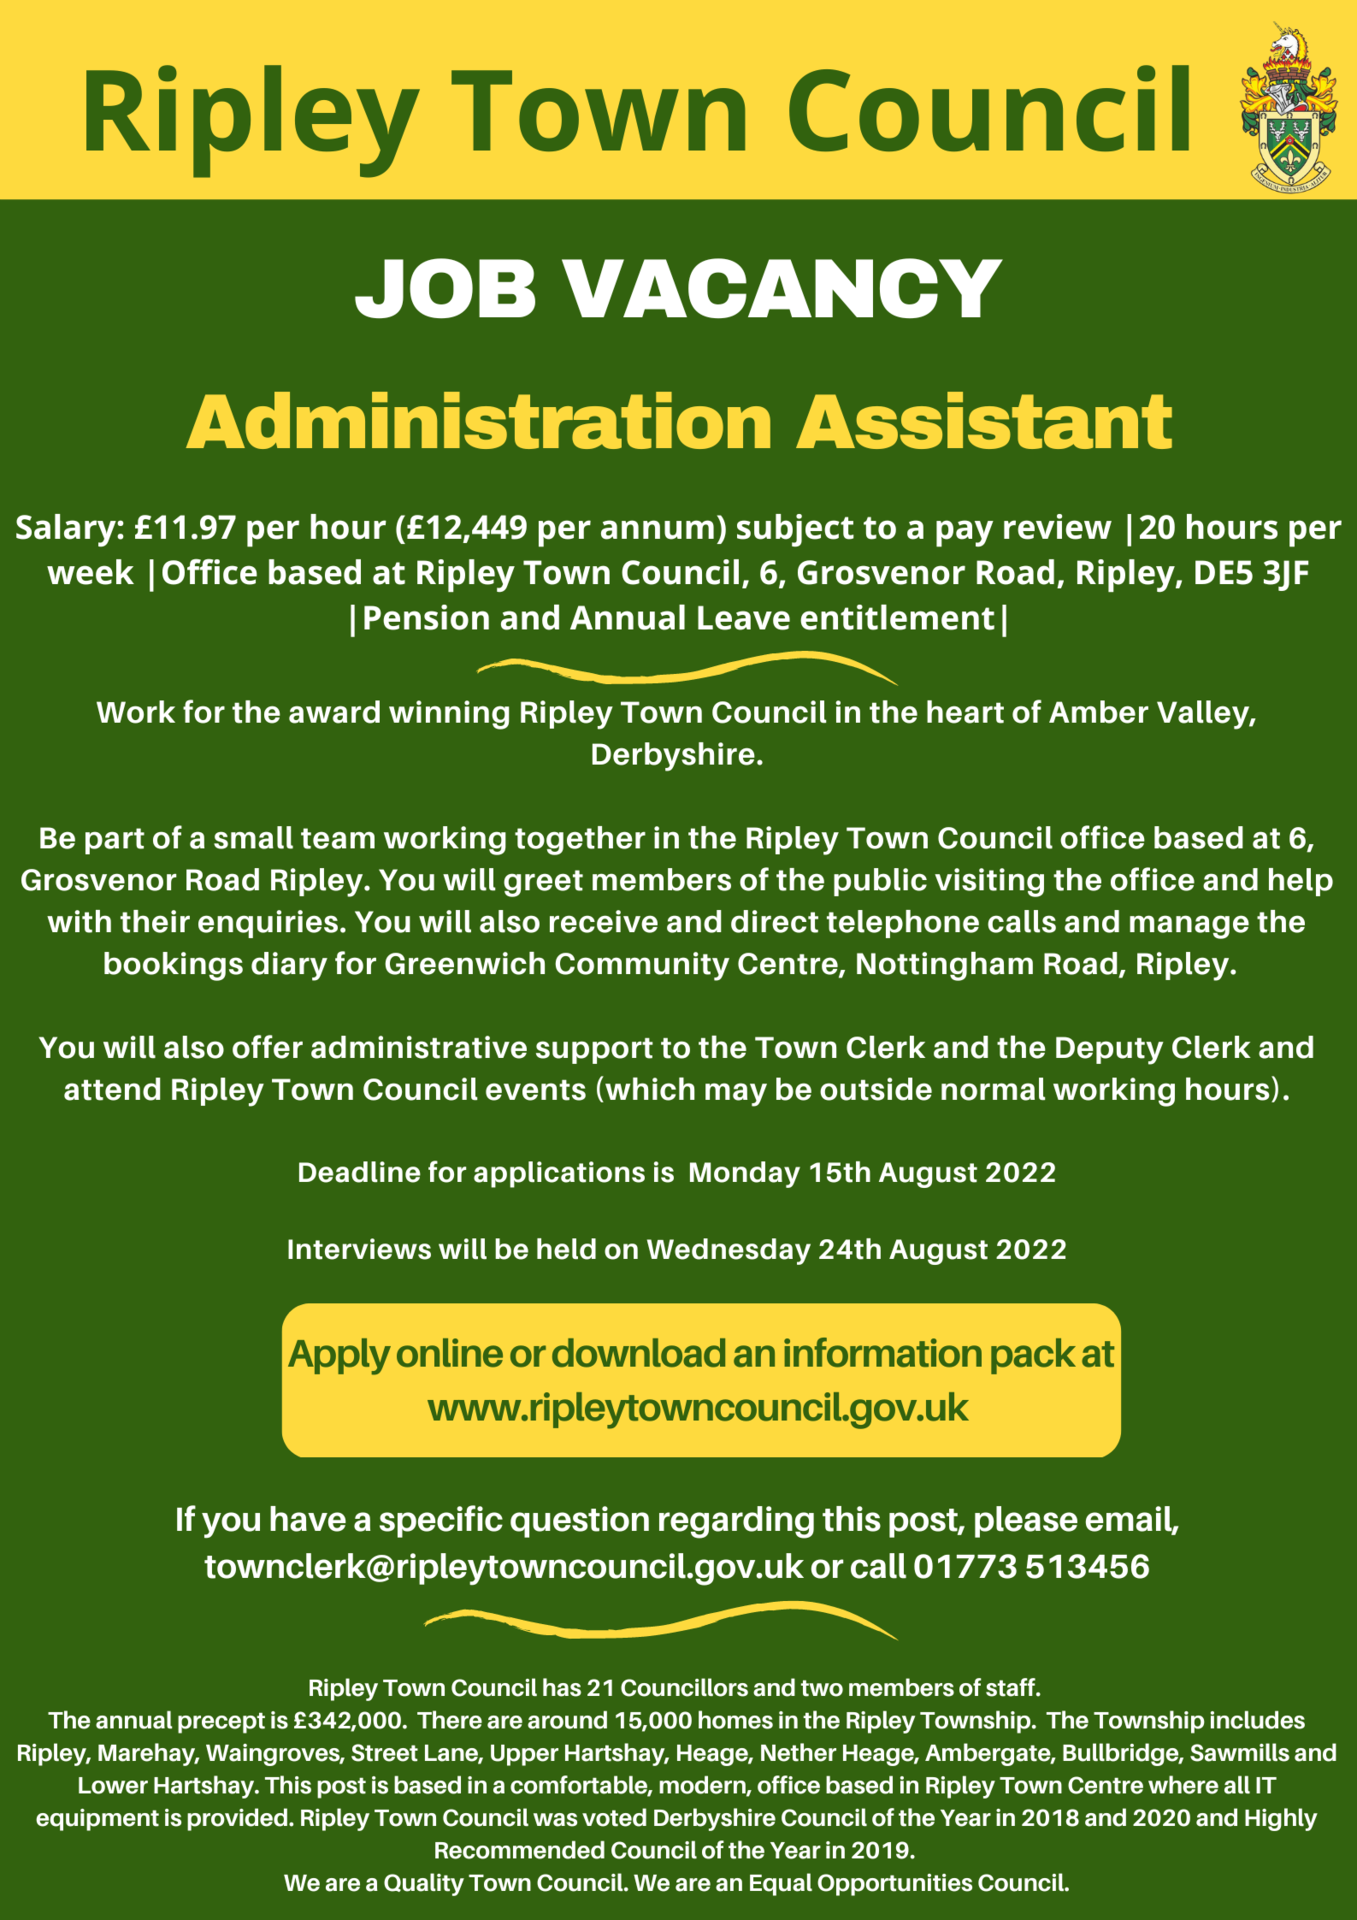 Ripley Town Council Administration Assistant advert